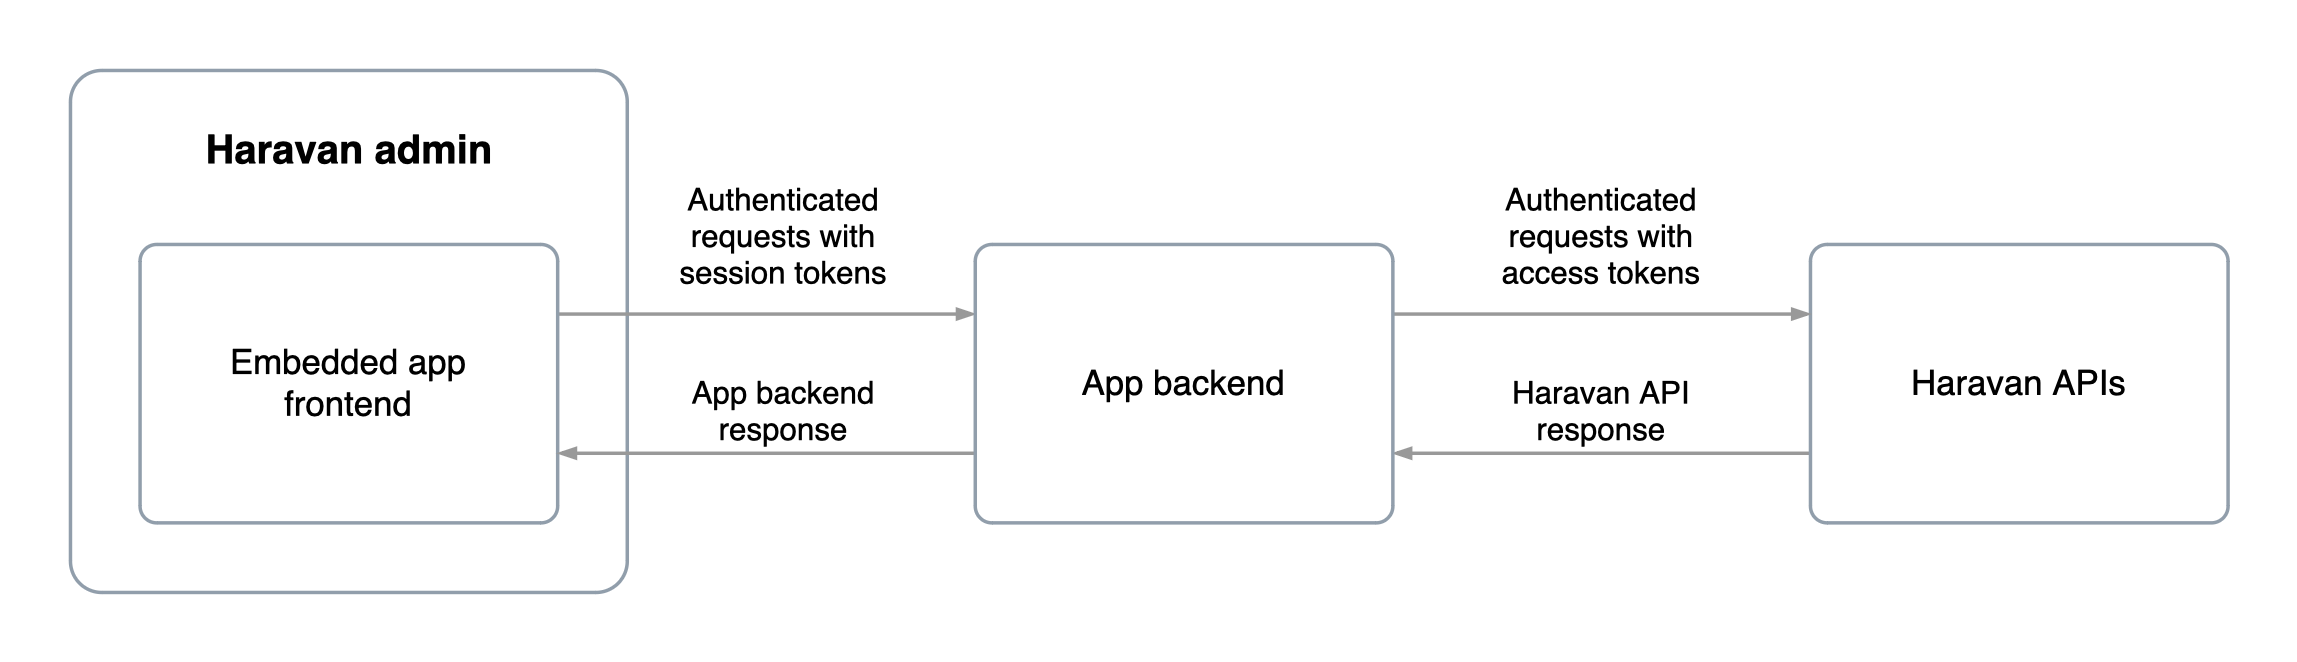 Authentication process using session tokens and API access tokens